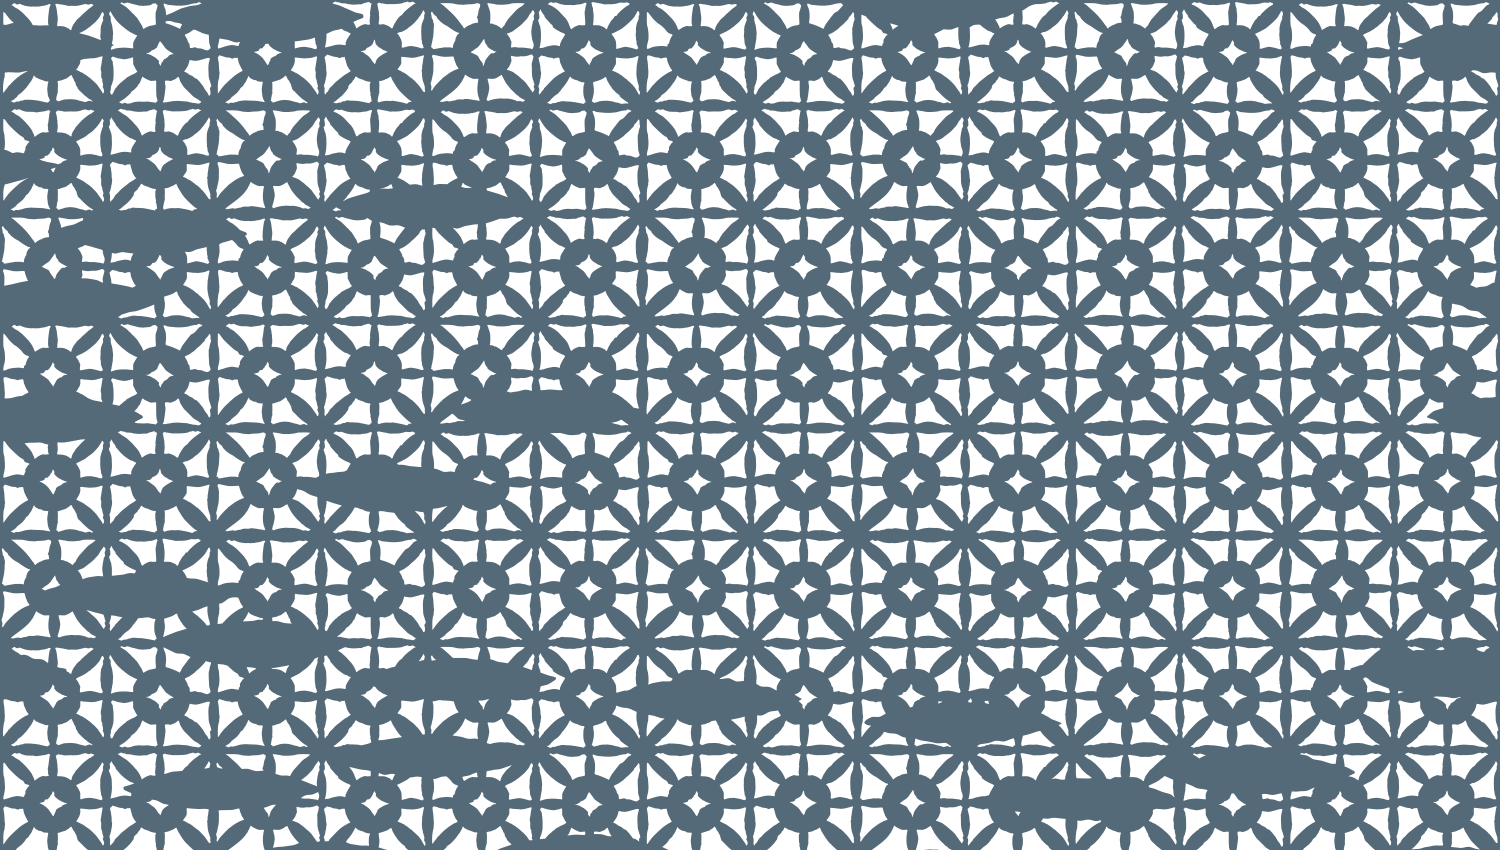 Parasoleil™ Balambra© pattern displayed with a blue color overlay